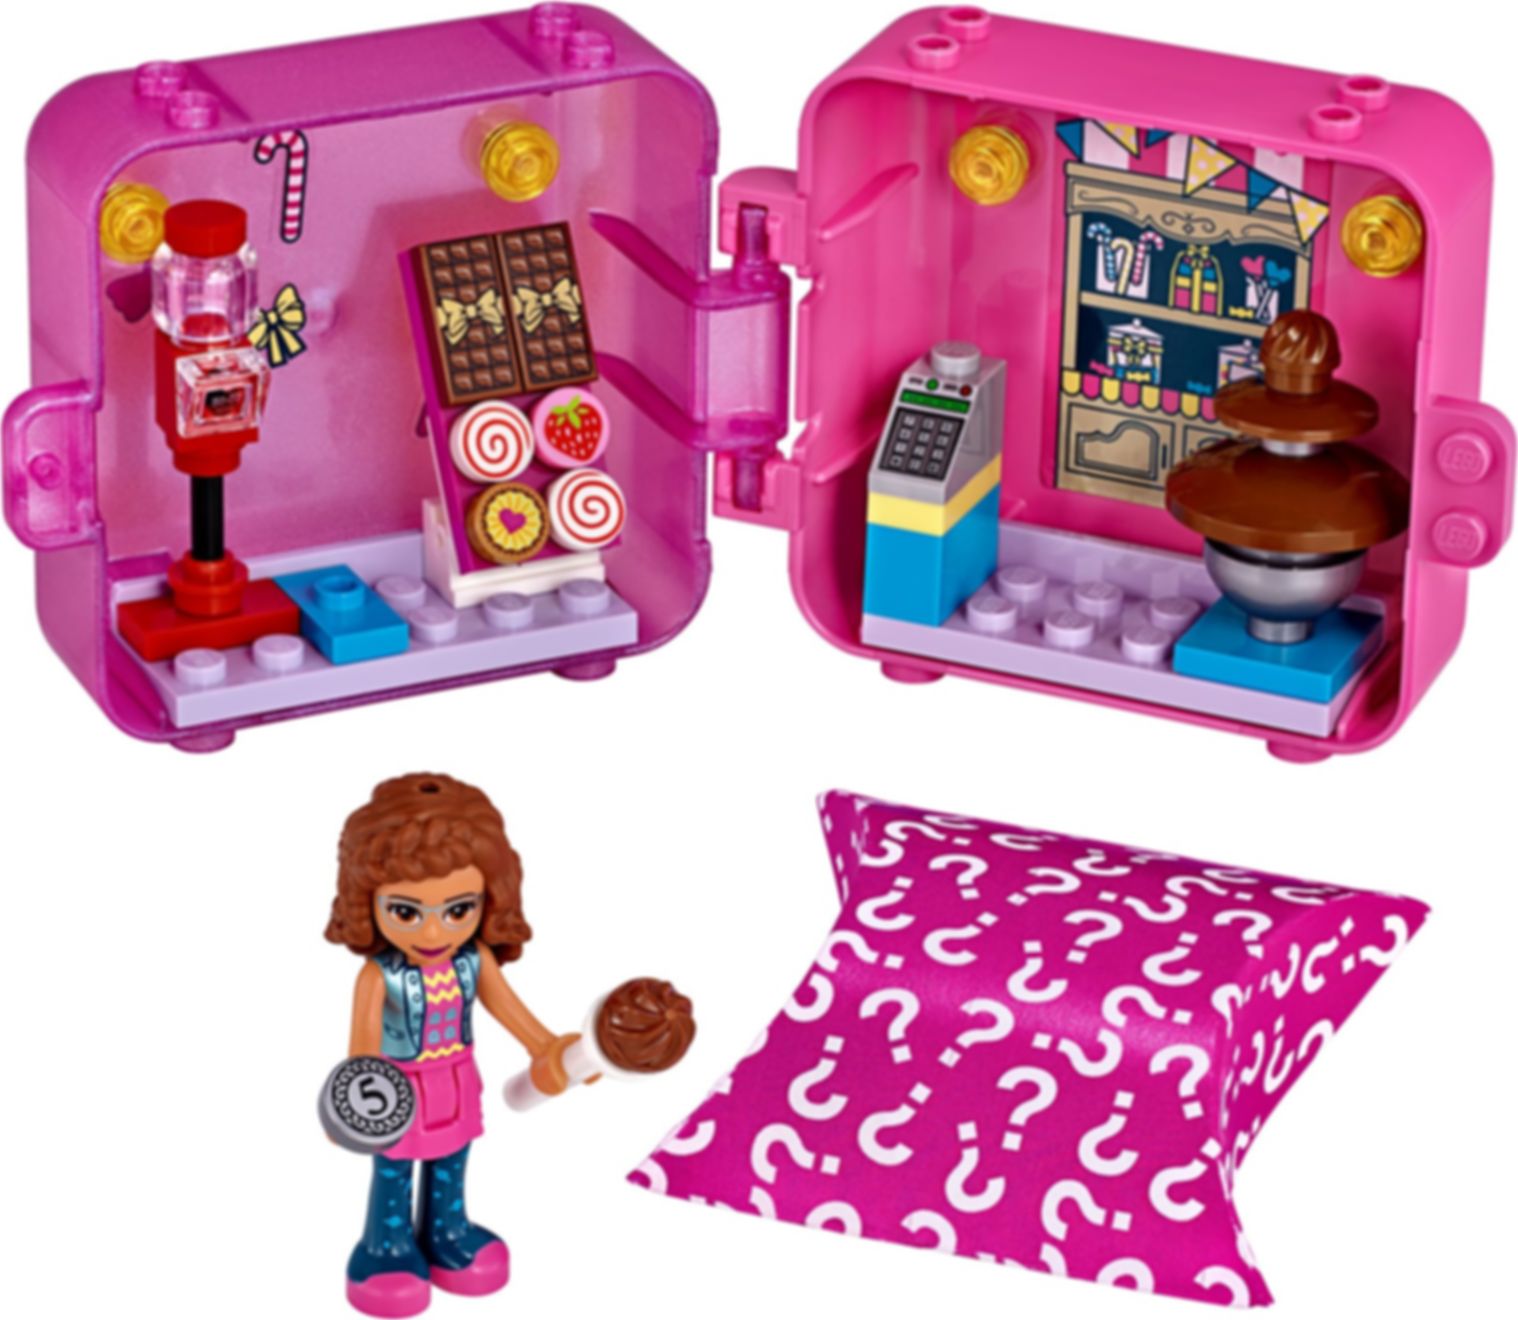 LEGO® Friends Olivia's Shopping Play Cube components